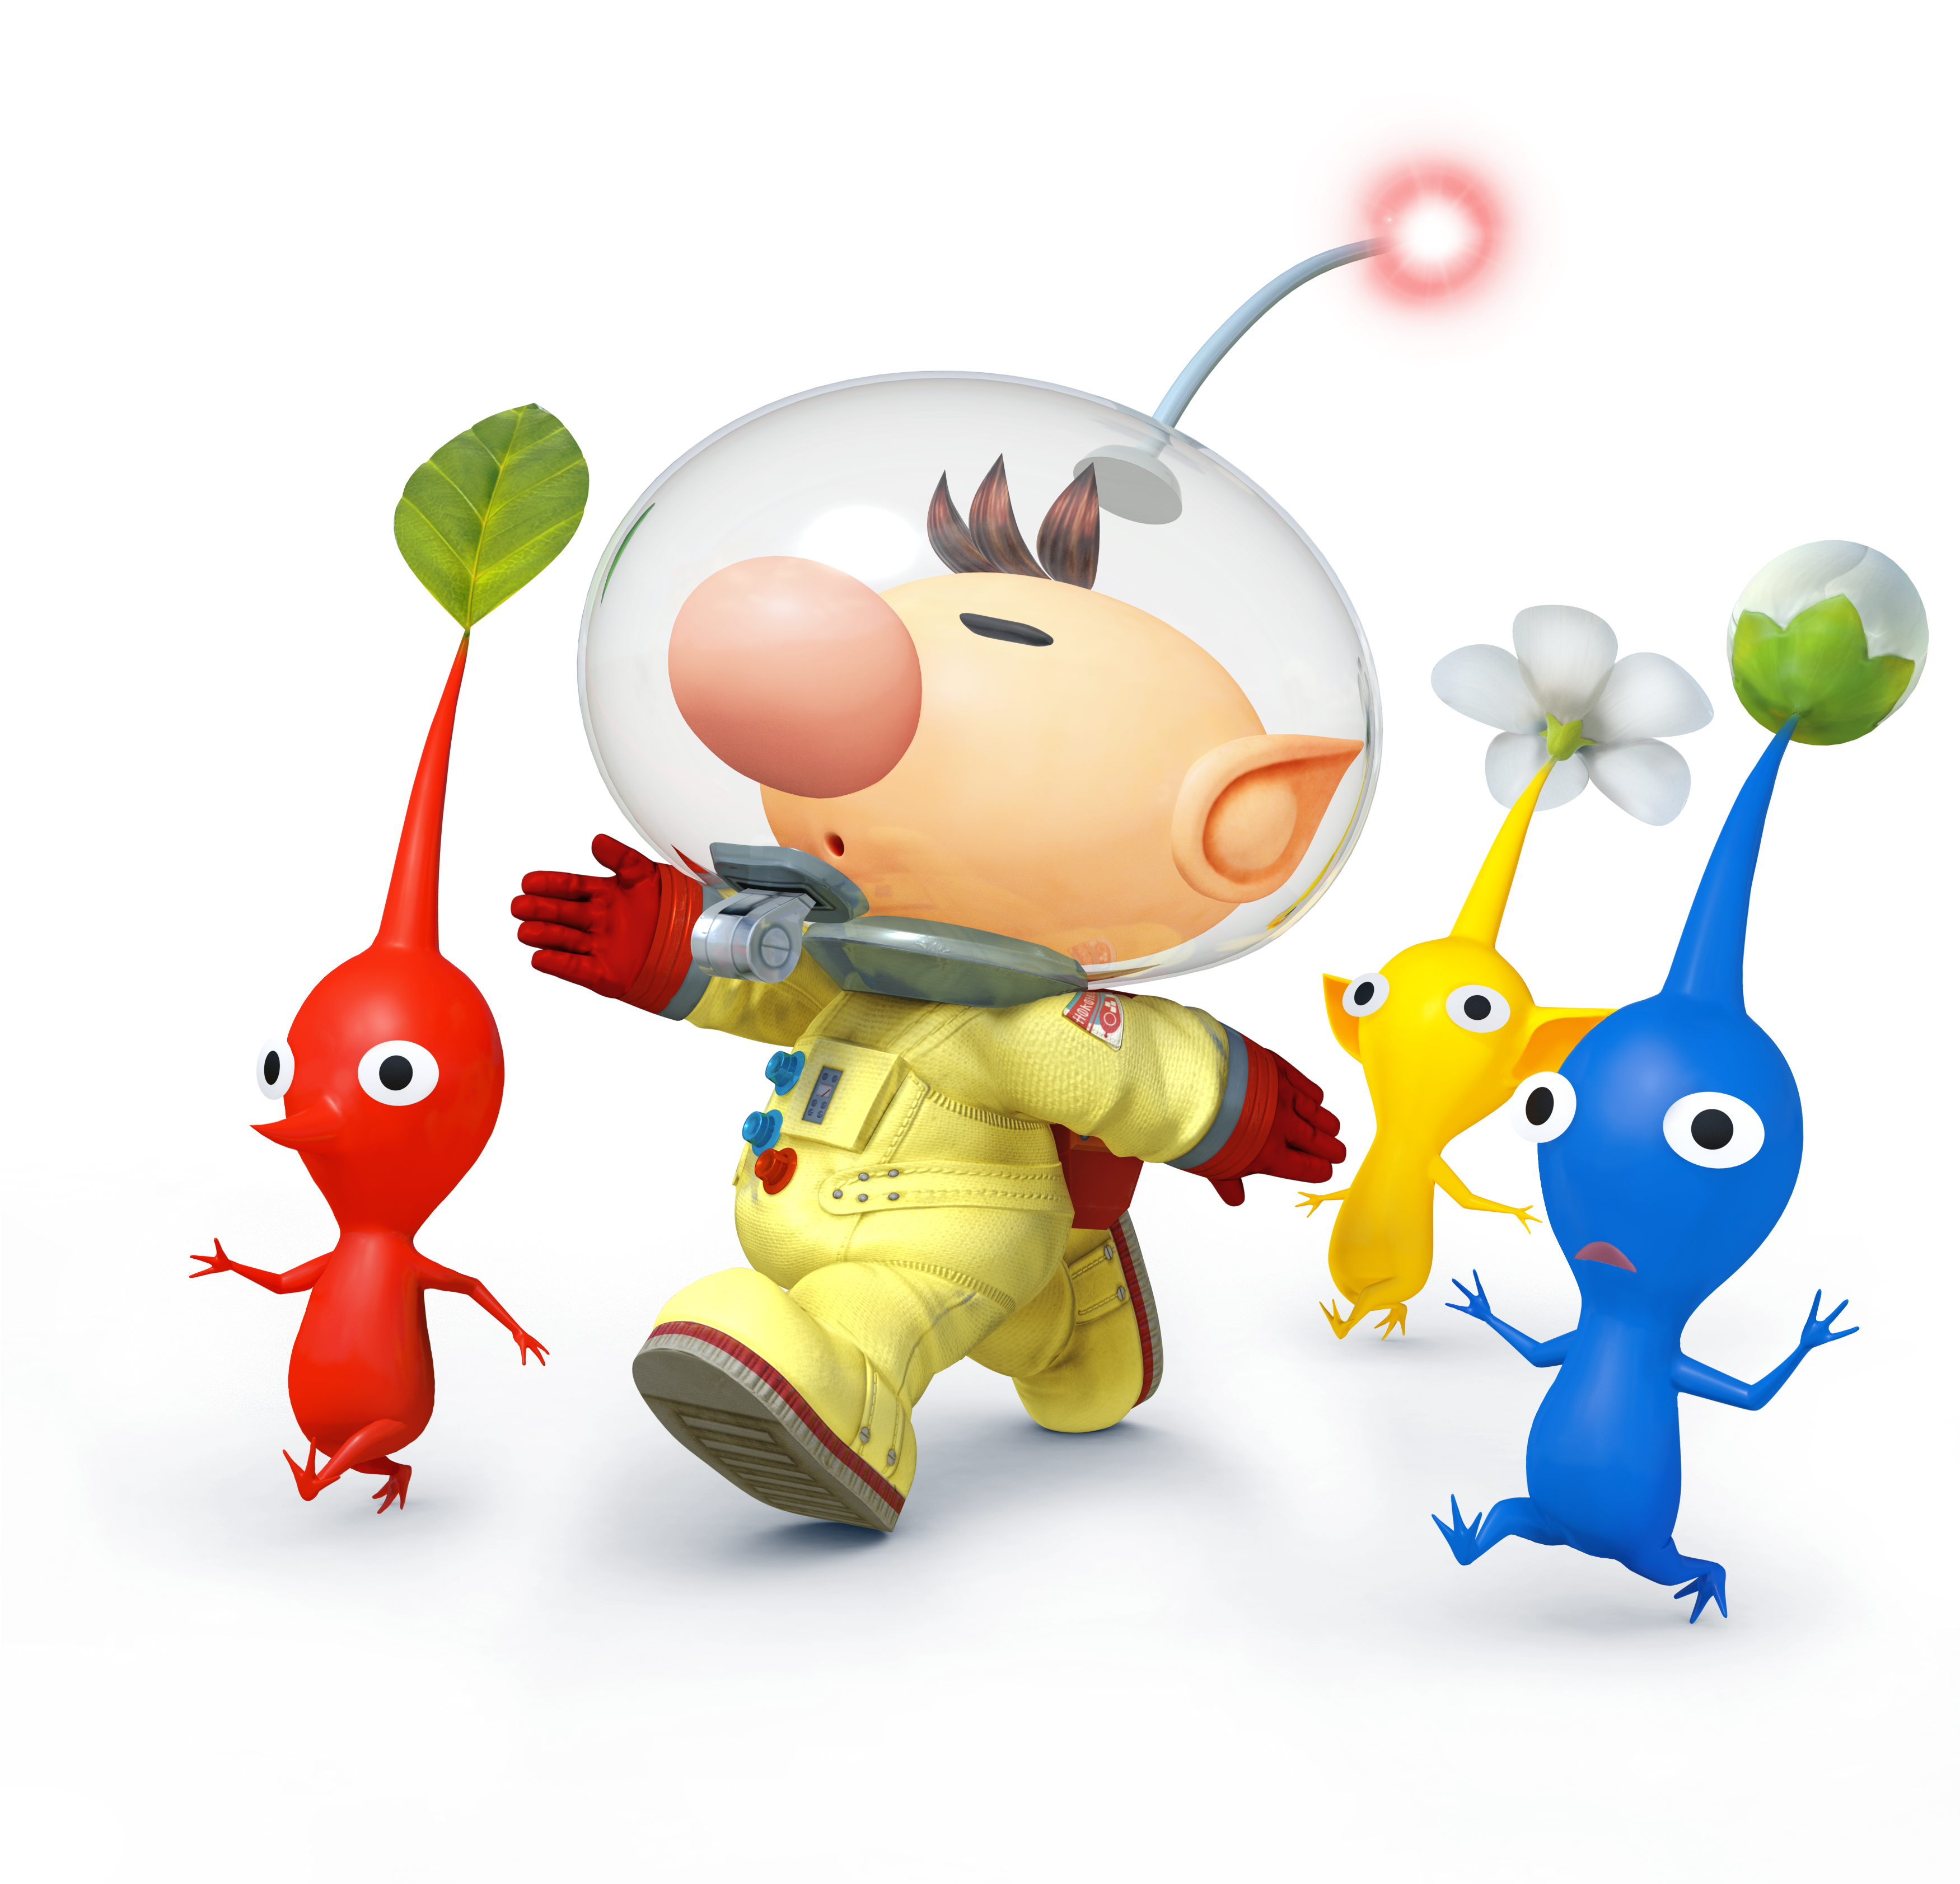 Greatest Video Game Character Ever Created - Captain Olimar (3500x3500)